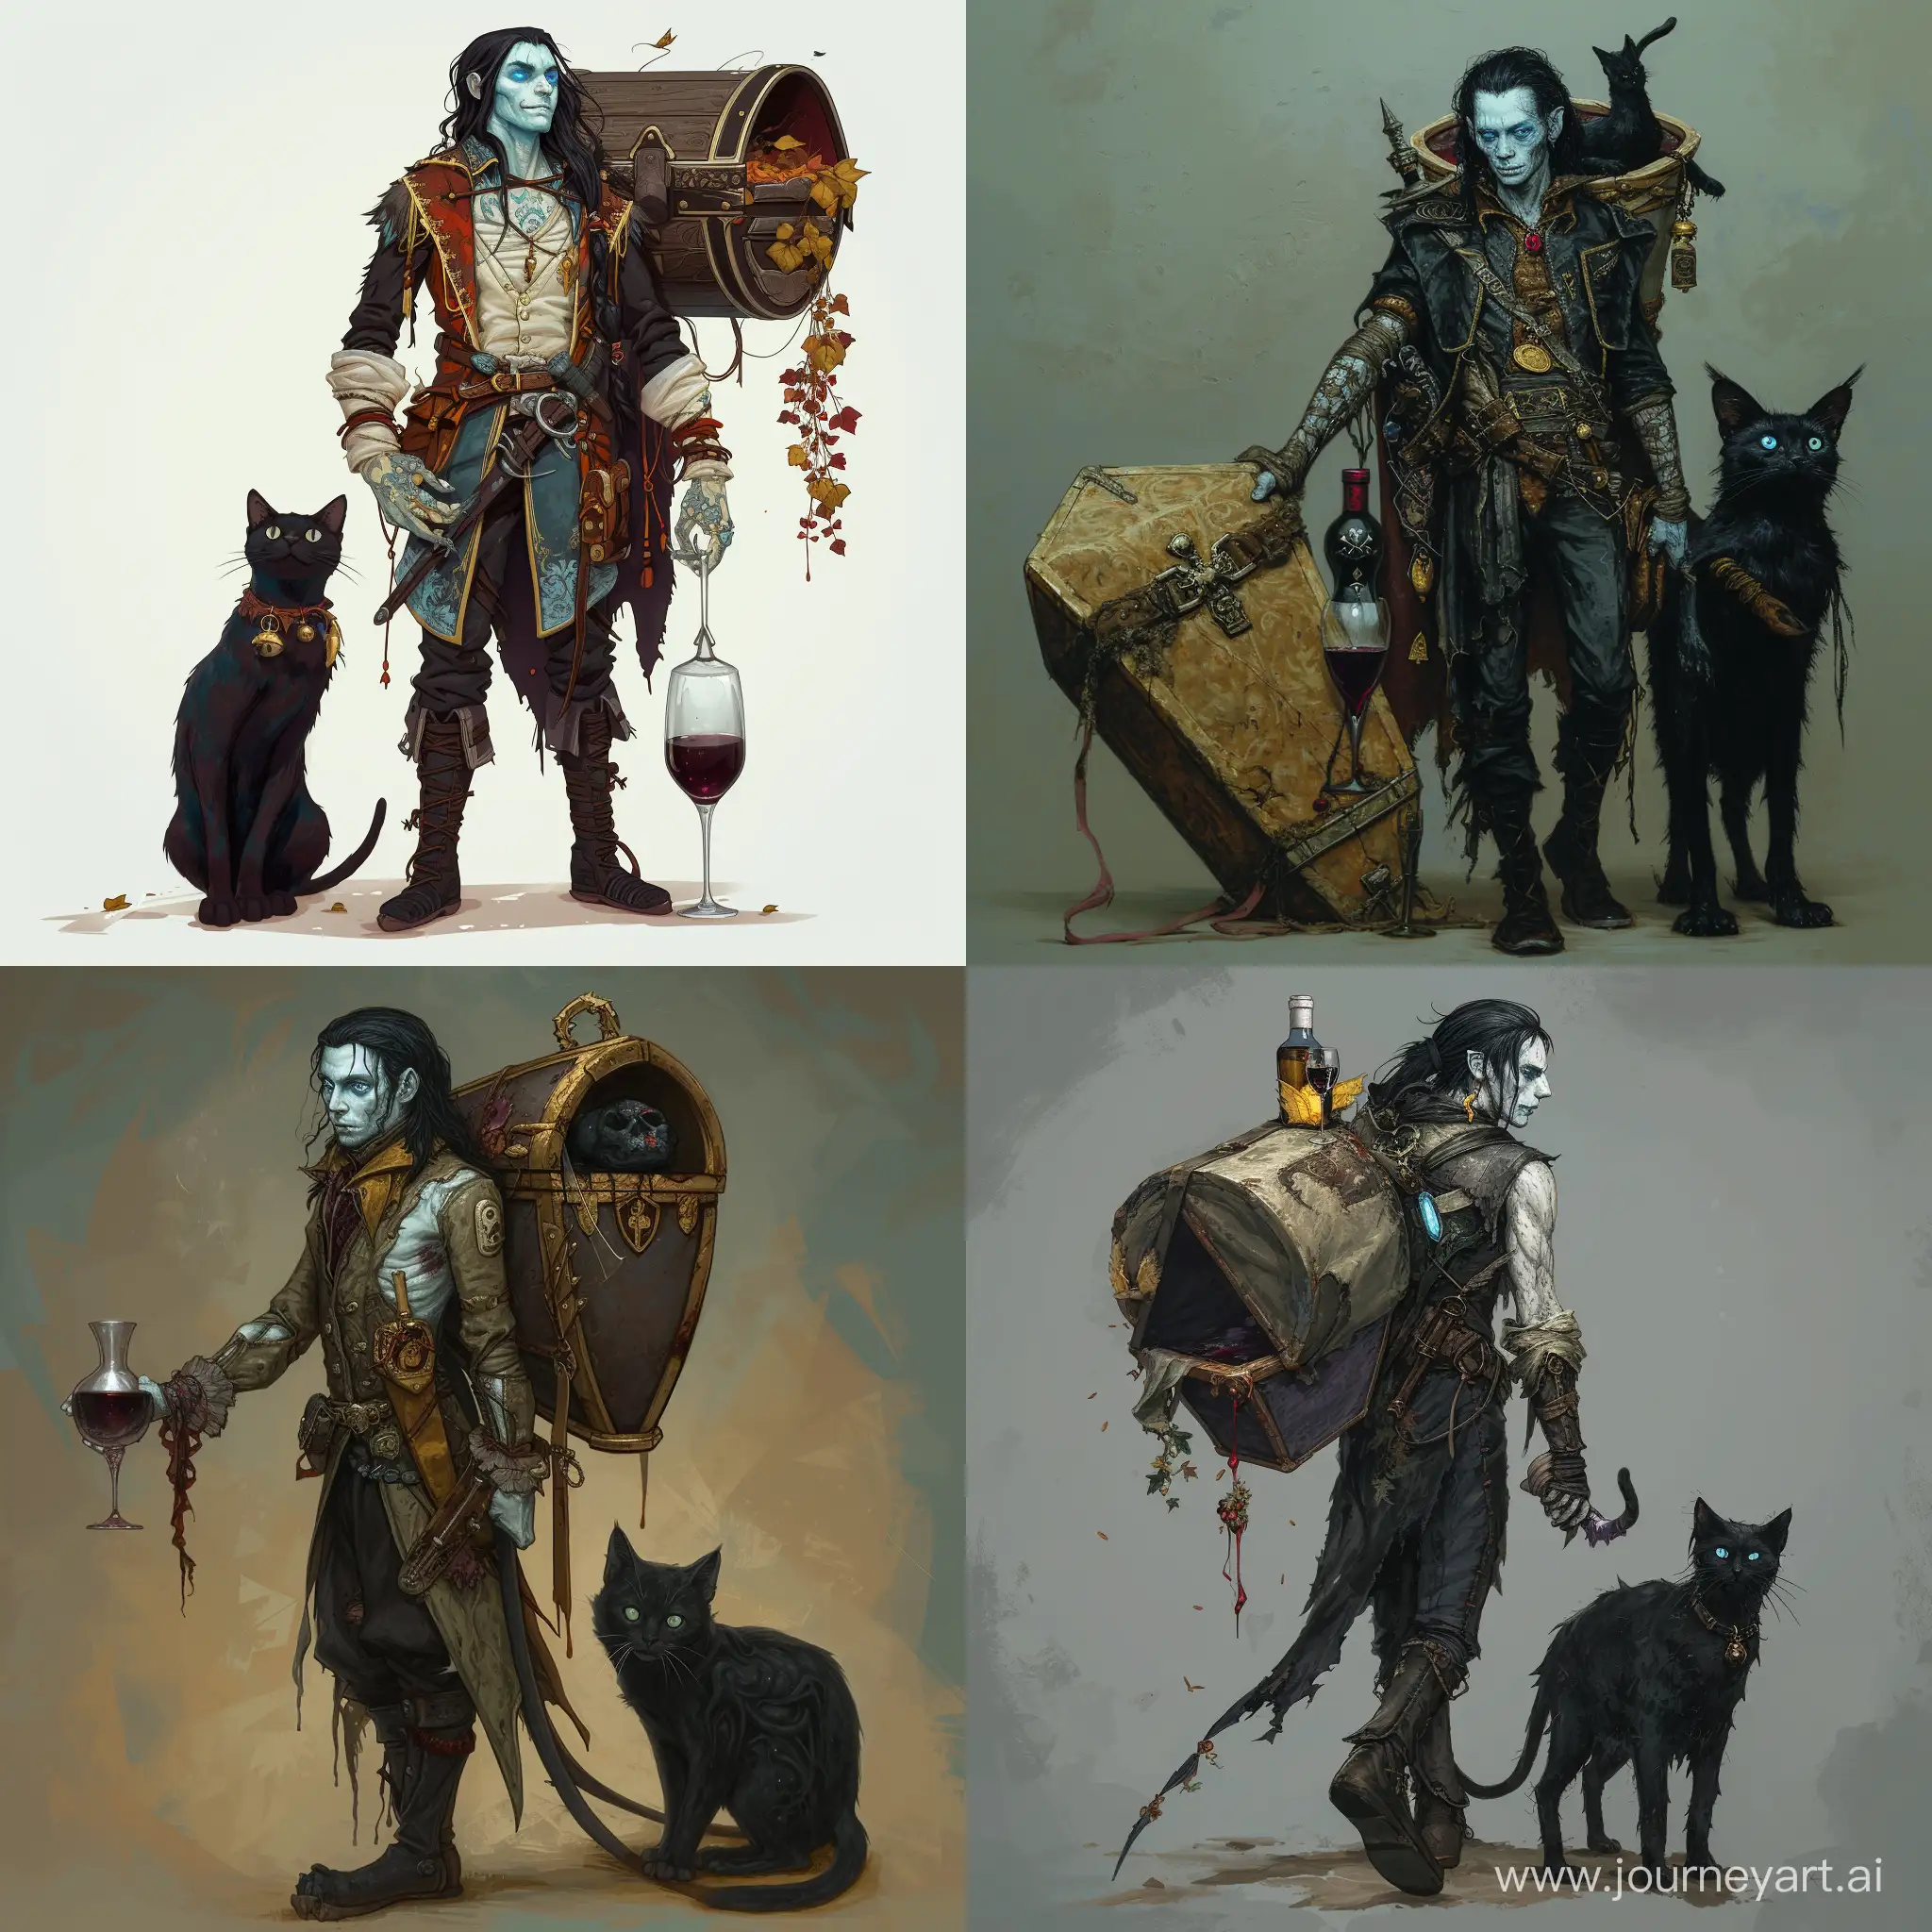 Brooding-Necromancer-with-Coffin-and-Resurrected-Companion